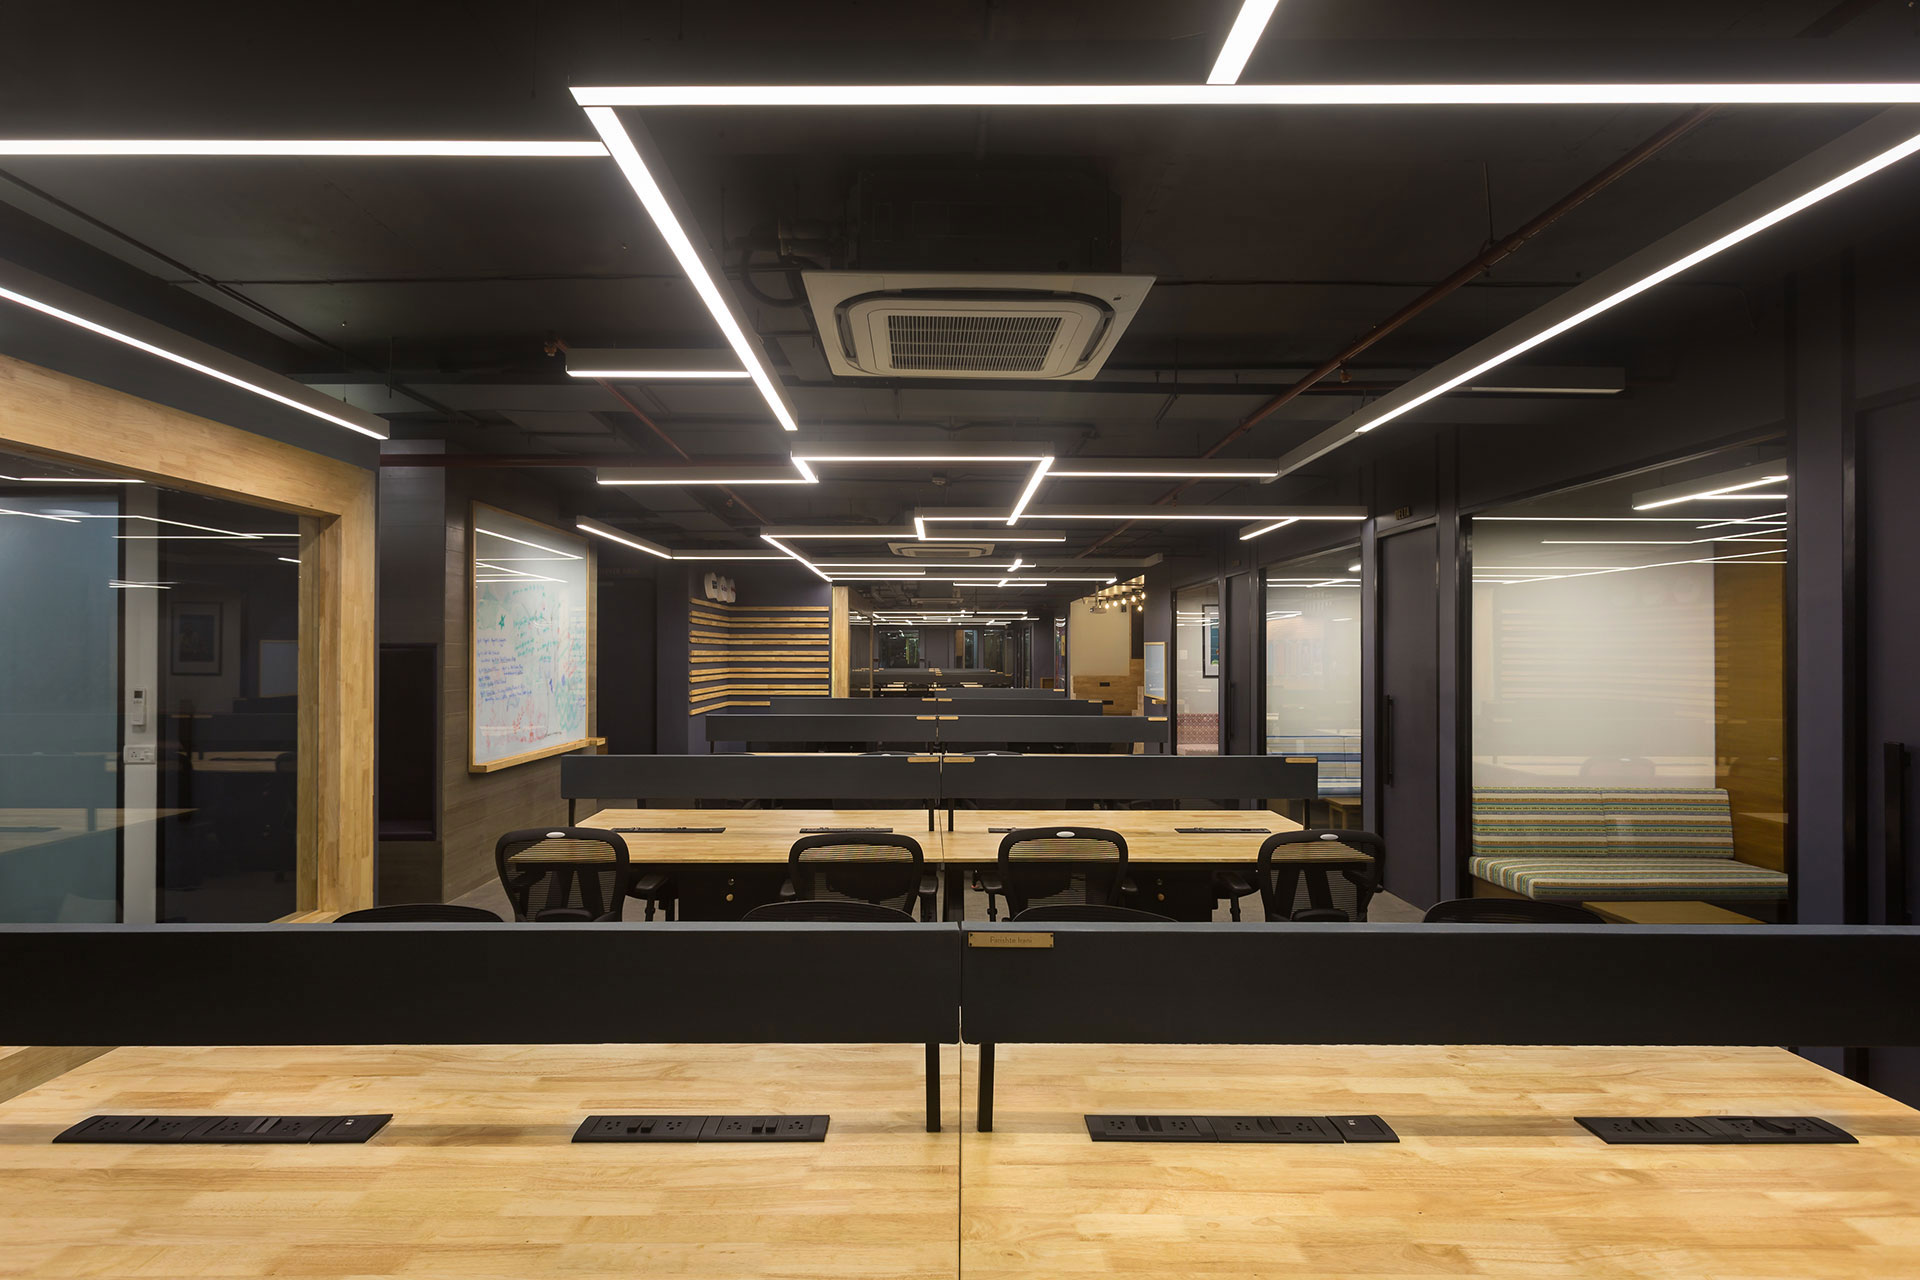 Most of the secondary and tertiary functions are placed along the periphery allowing for a large central open tunnel for the workstations. The main work space area is kept clean and minimal using a  material palette consisting of hues of grey, black with rubber wood.